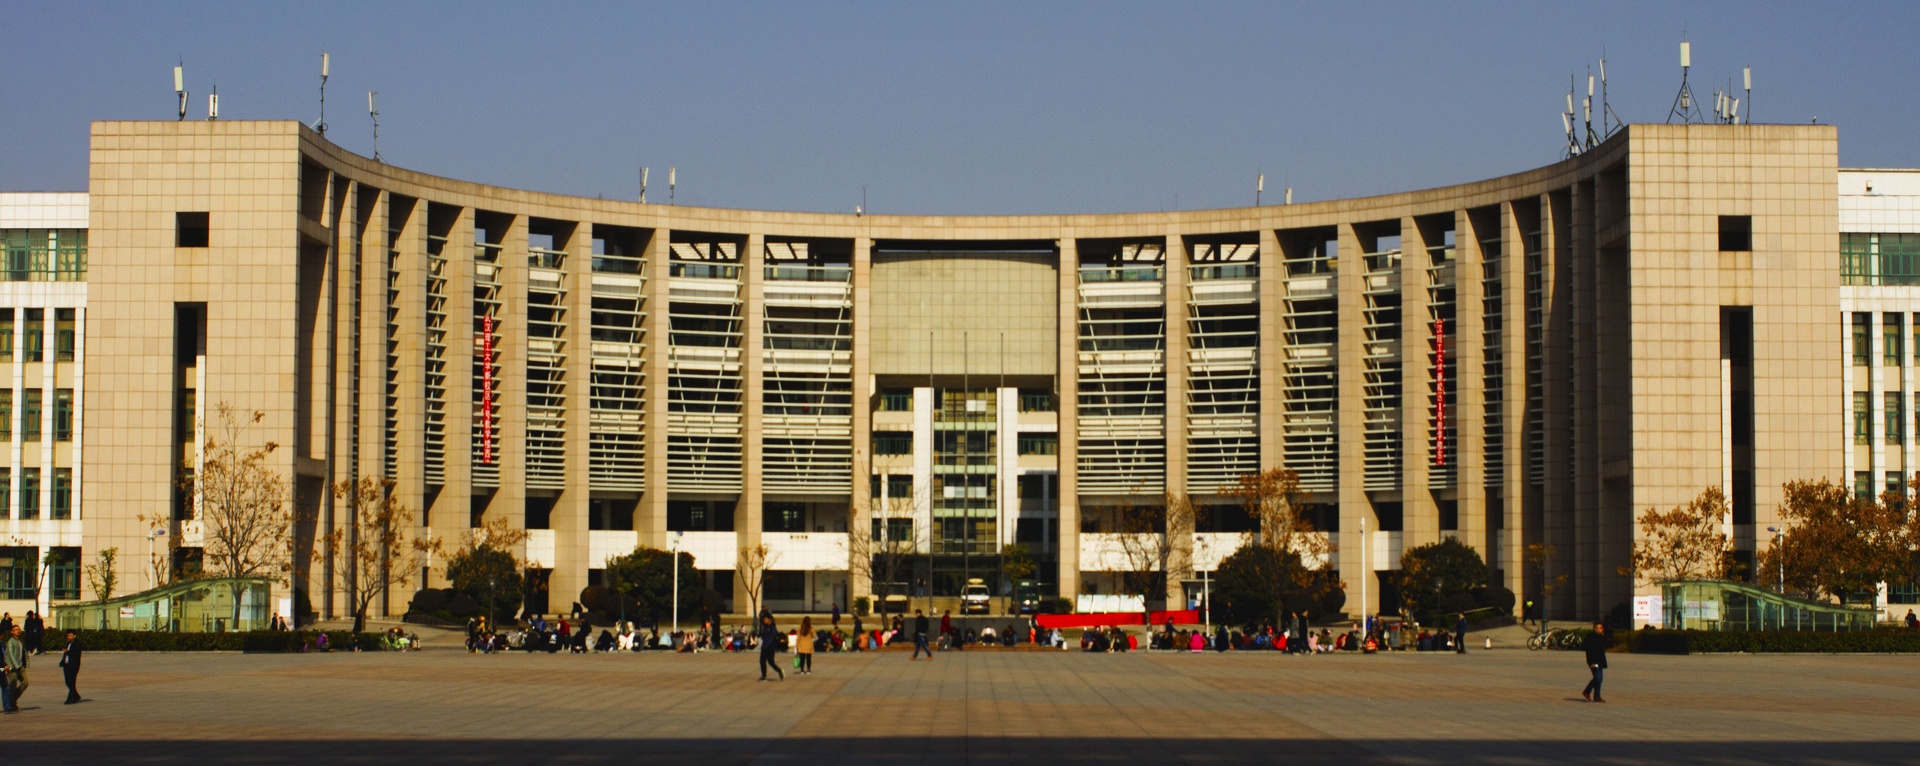 Number_one_academic_building_in_Wuhan_University_of_Technology_Wuhan_China_20171210.jpg